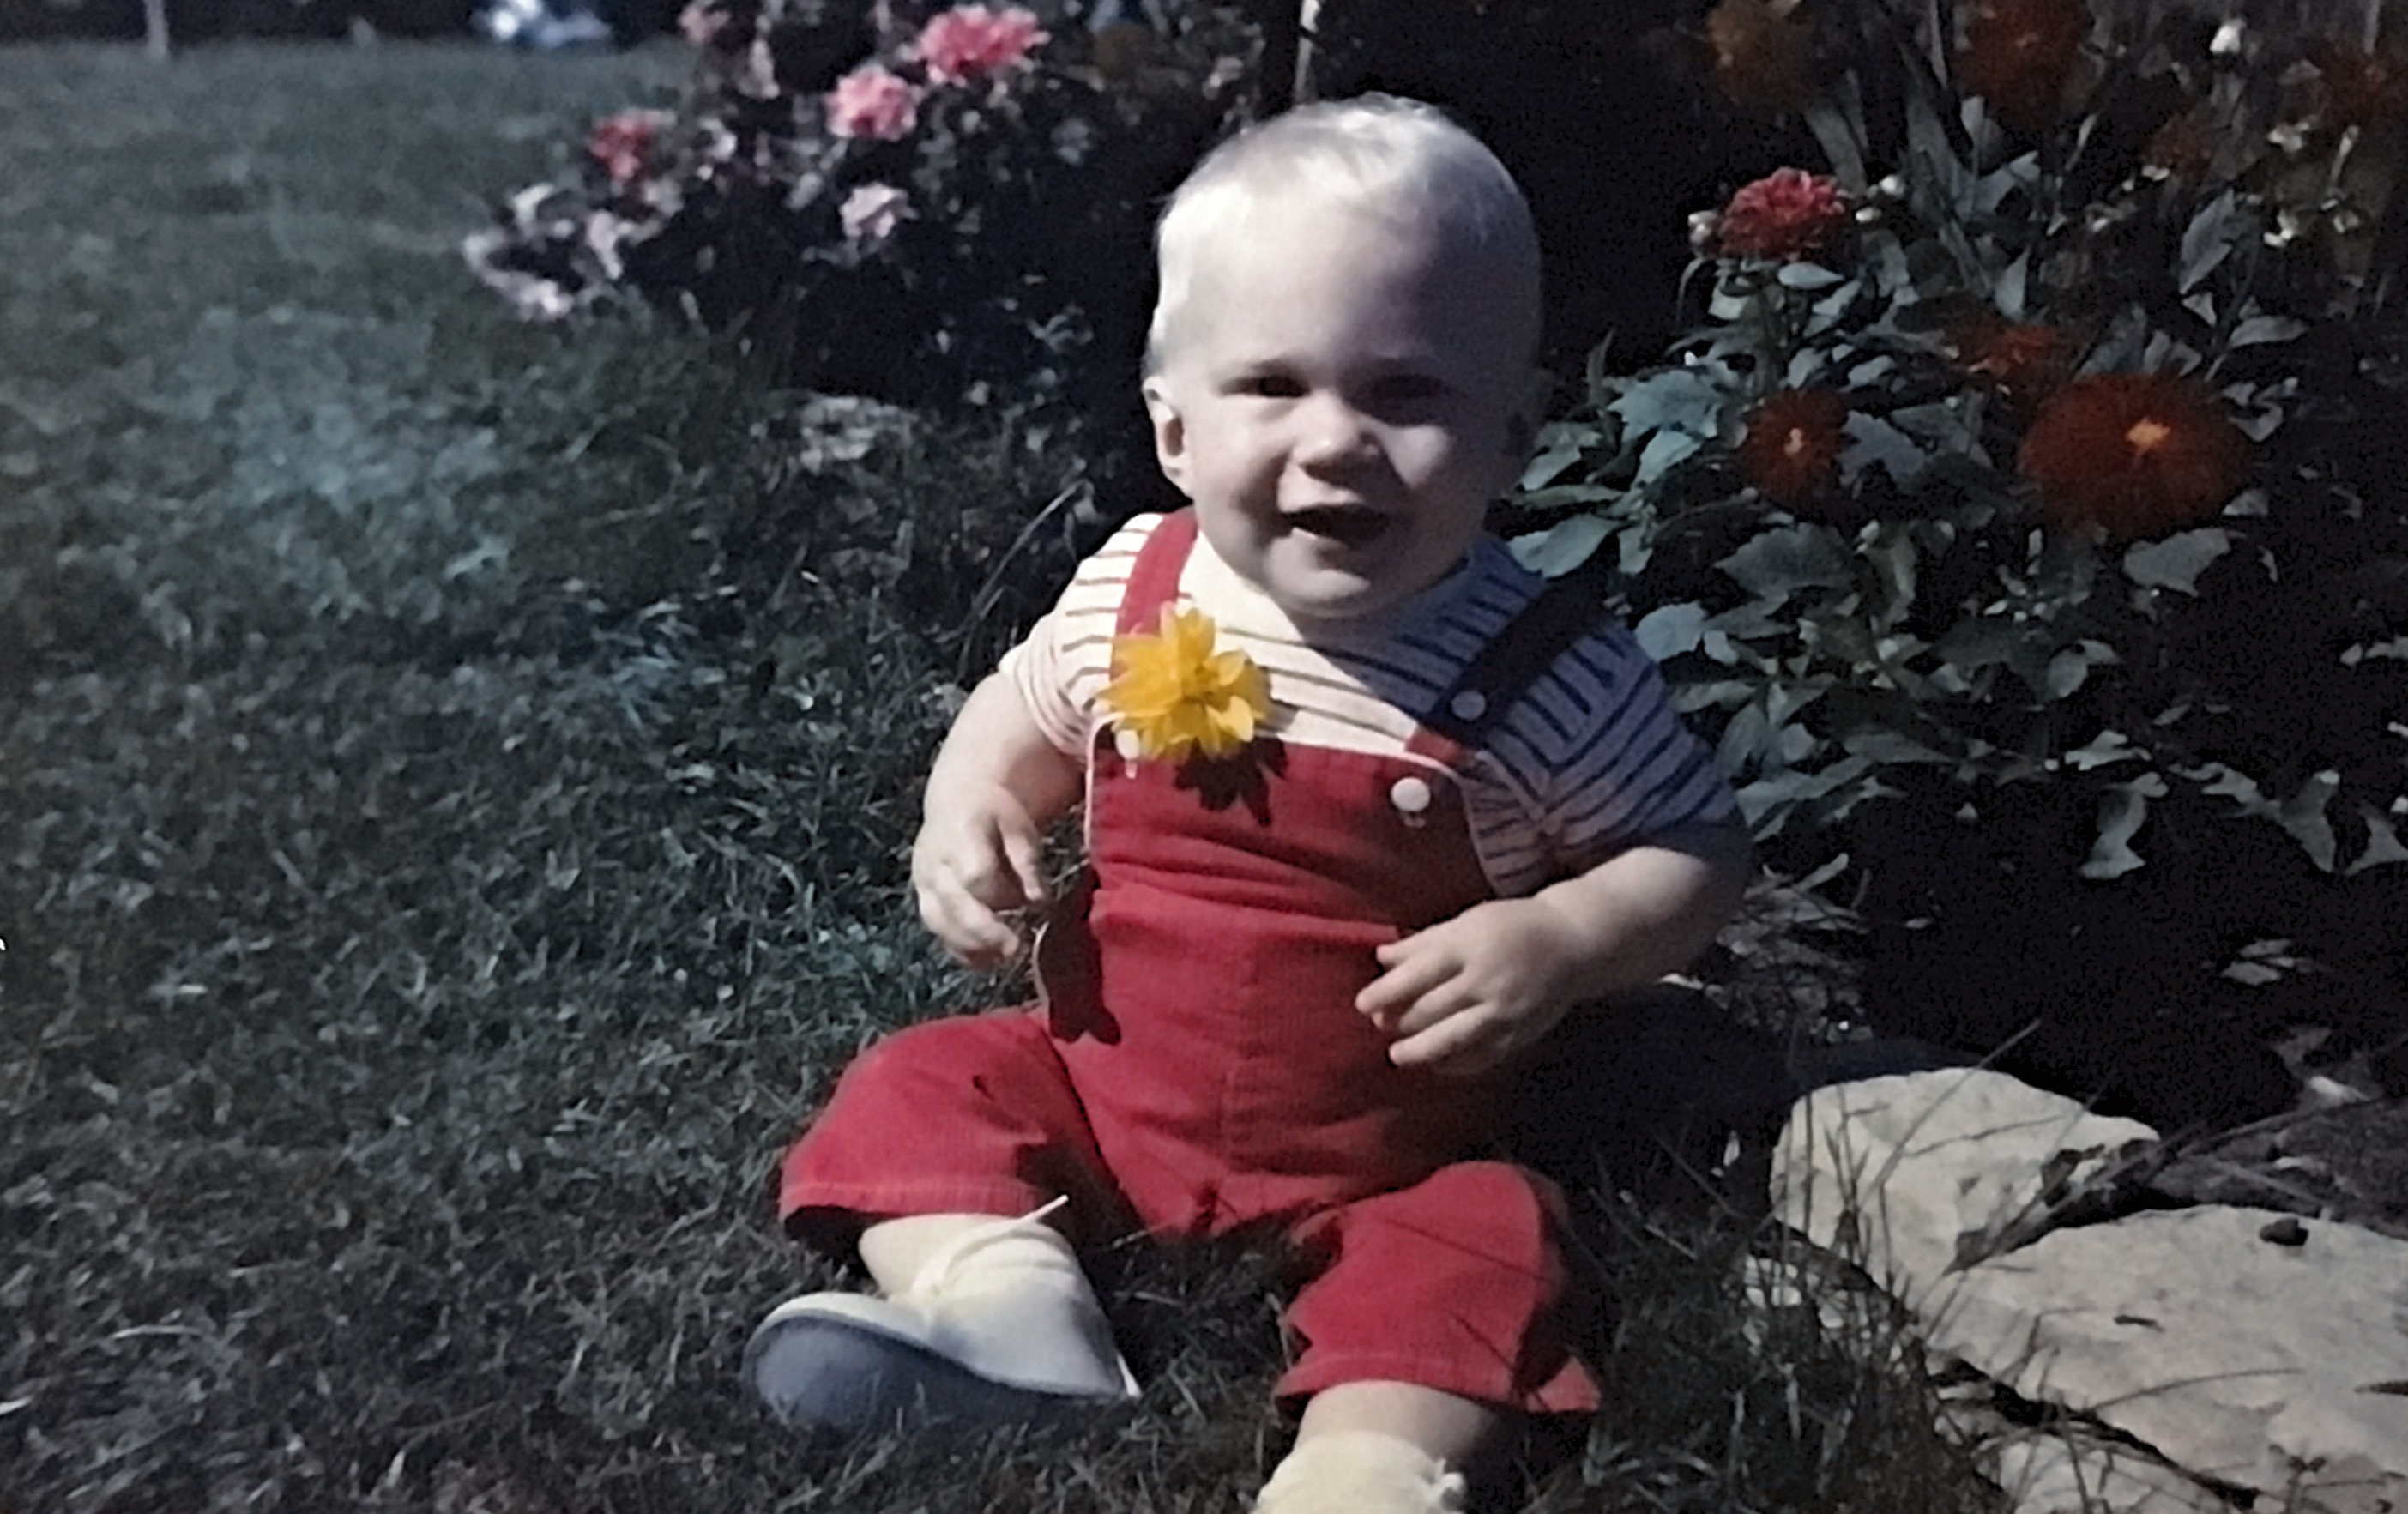 This is my younger brother John at 7 months old in St.  Paul Minnesota in 1961